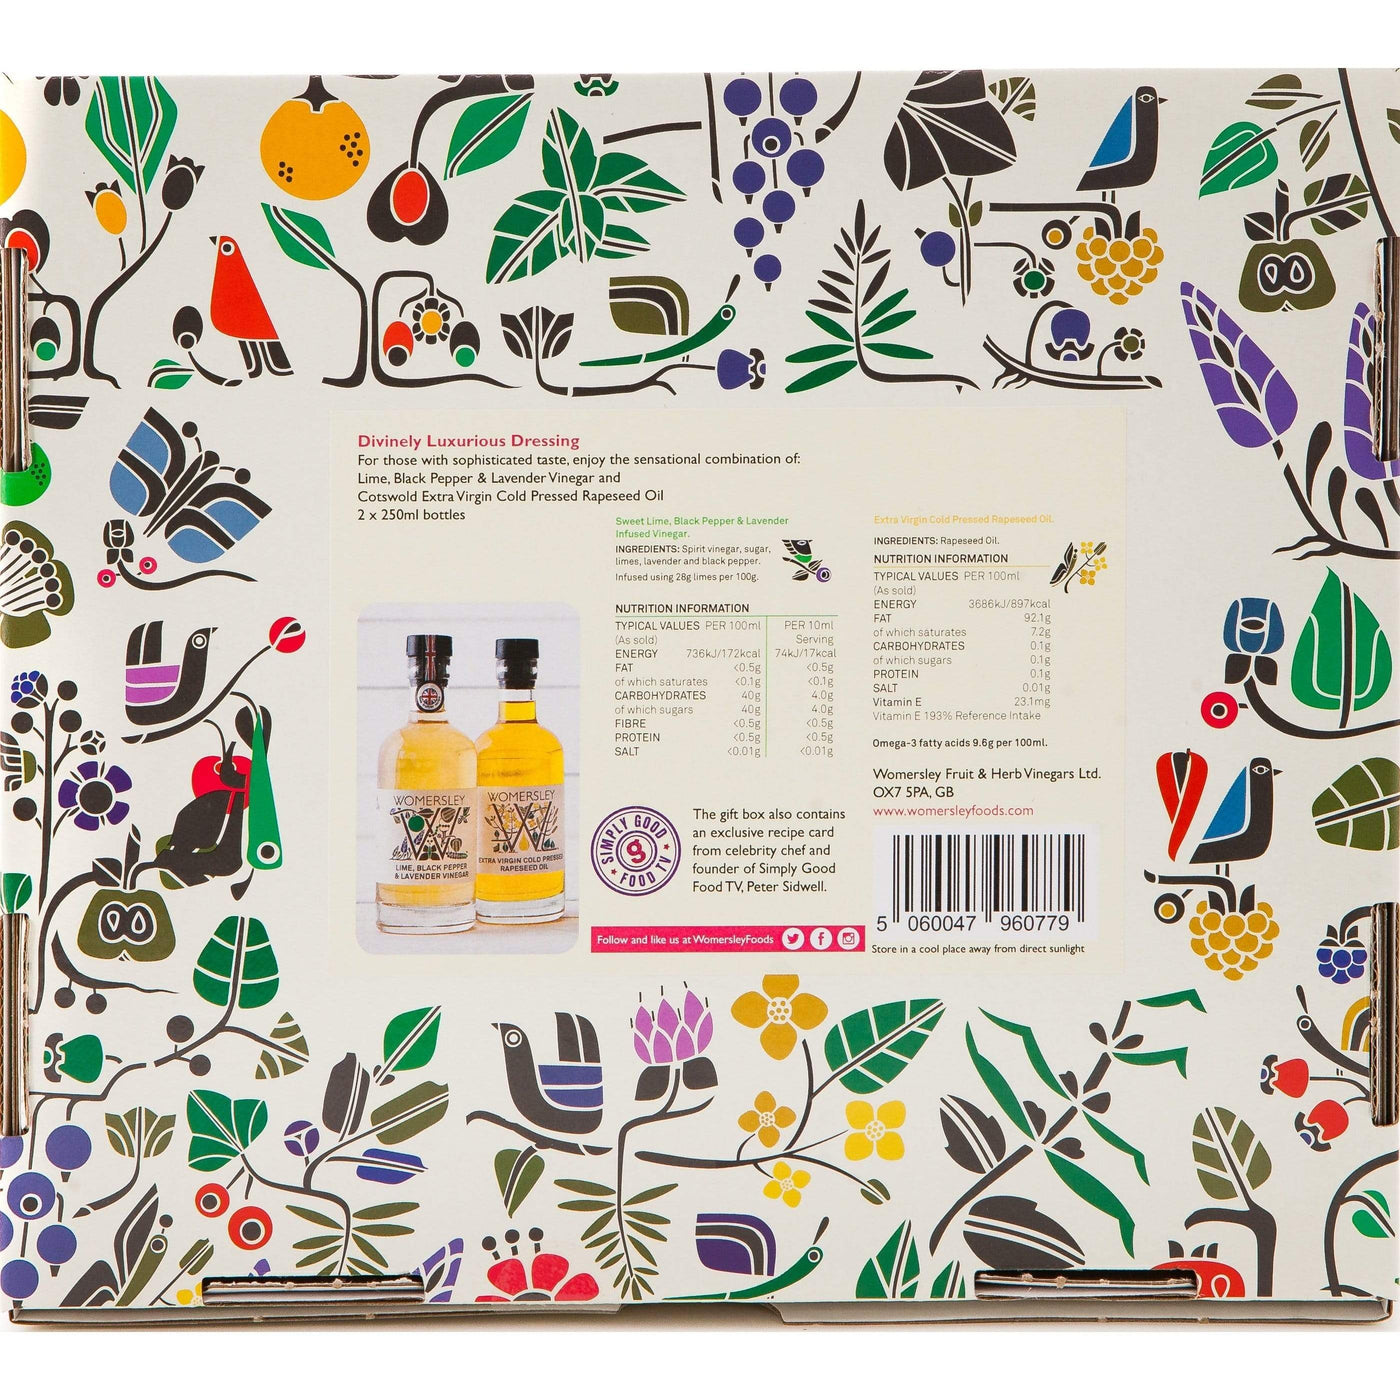 Back label of Womersley Foods Fruit & Herb vinegar Gift Box Divinely Luxurious Dressing showing nutrition information surrounded by Womersley Foods brand fruit illustration motifs.